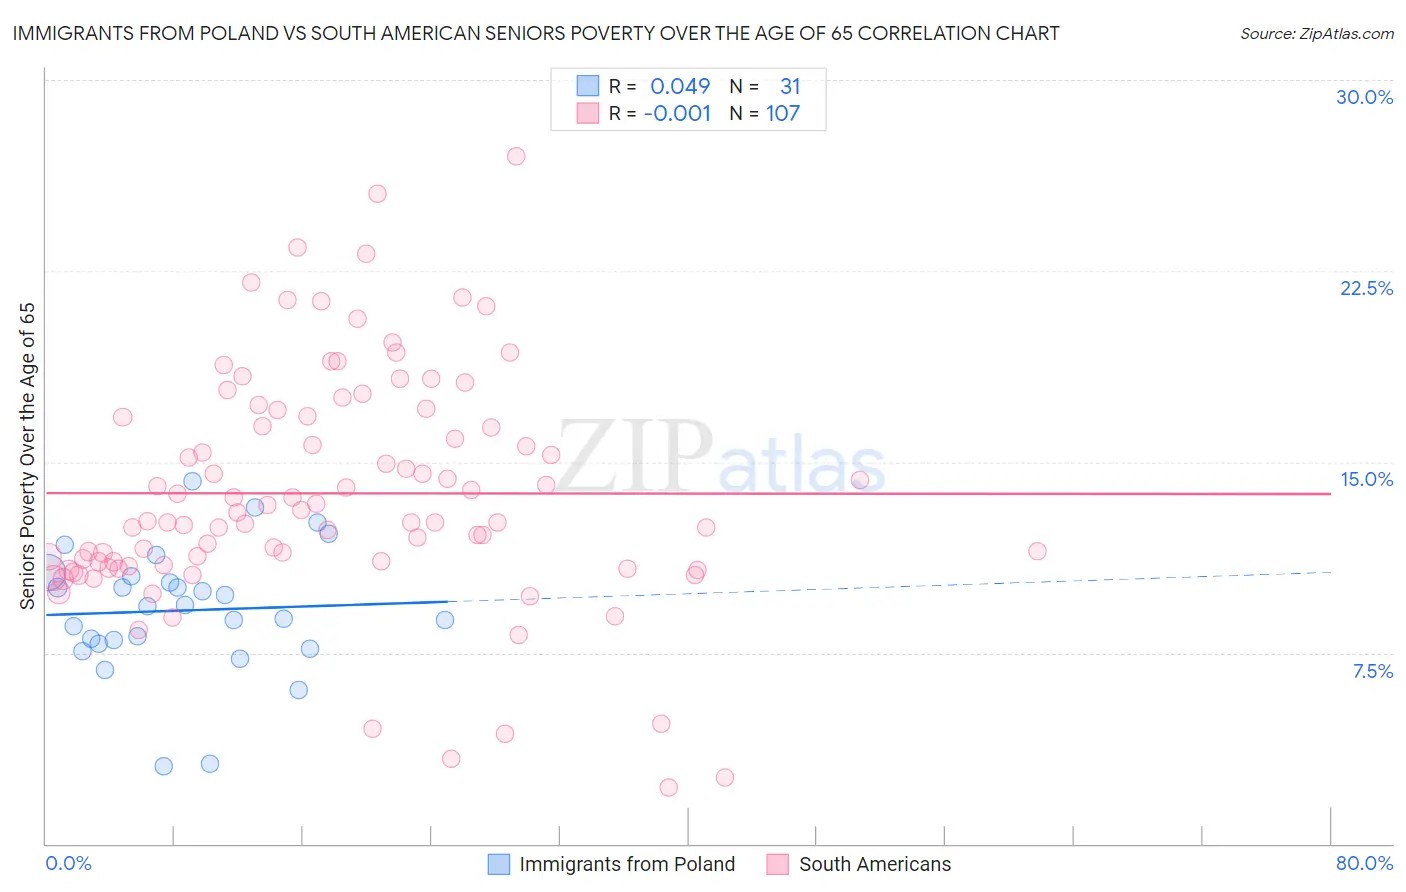 Immigrants from Poland vs South American Seniors Poverty Over the Age of 65